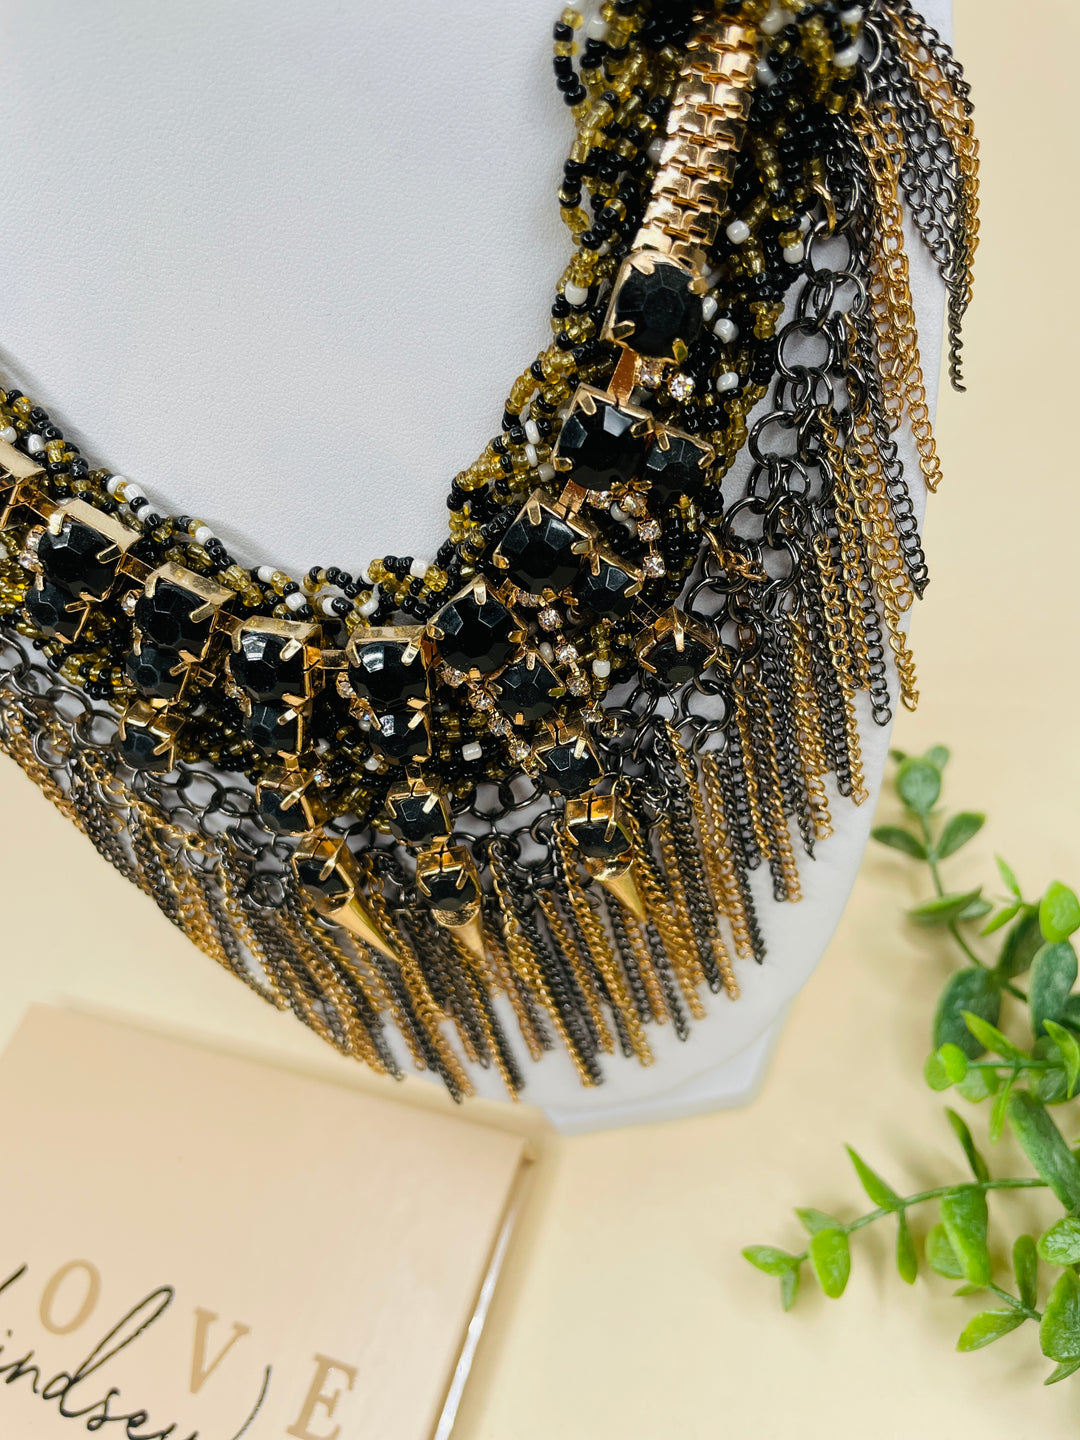 Statement Necklace: Metal, Stone, and Bead